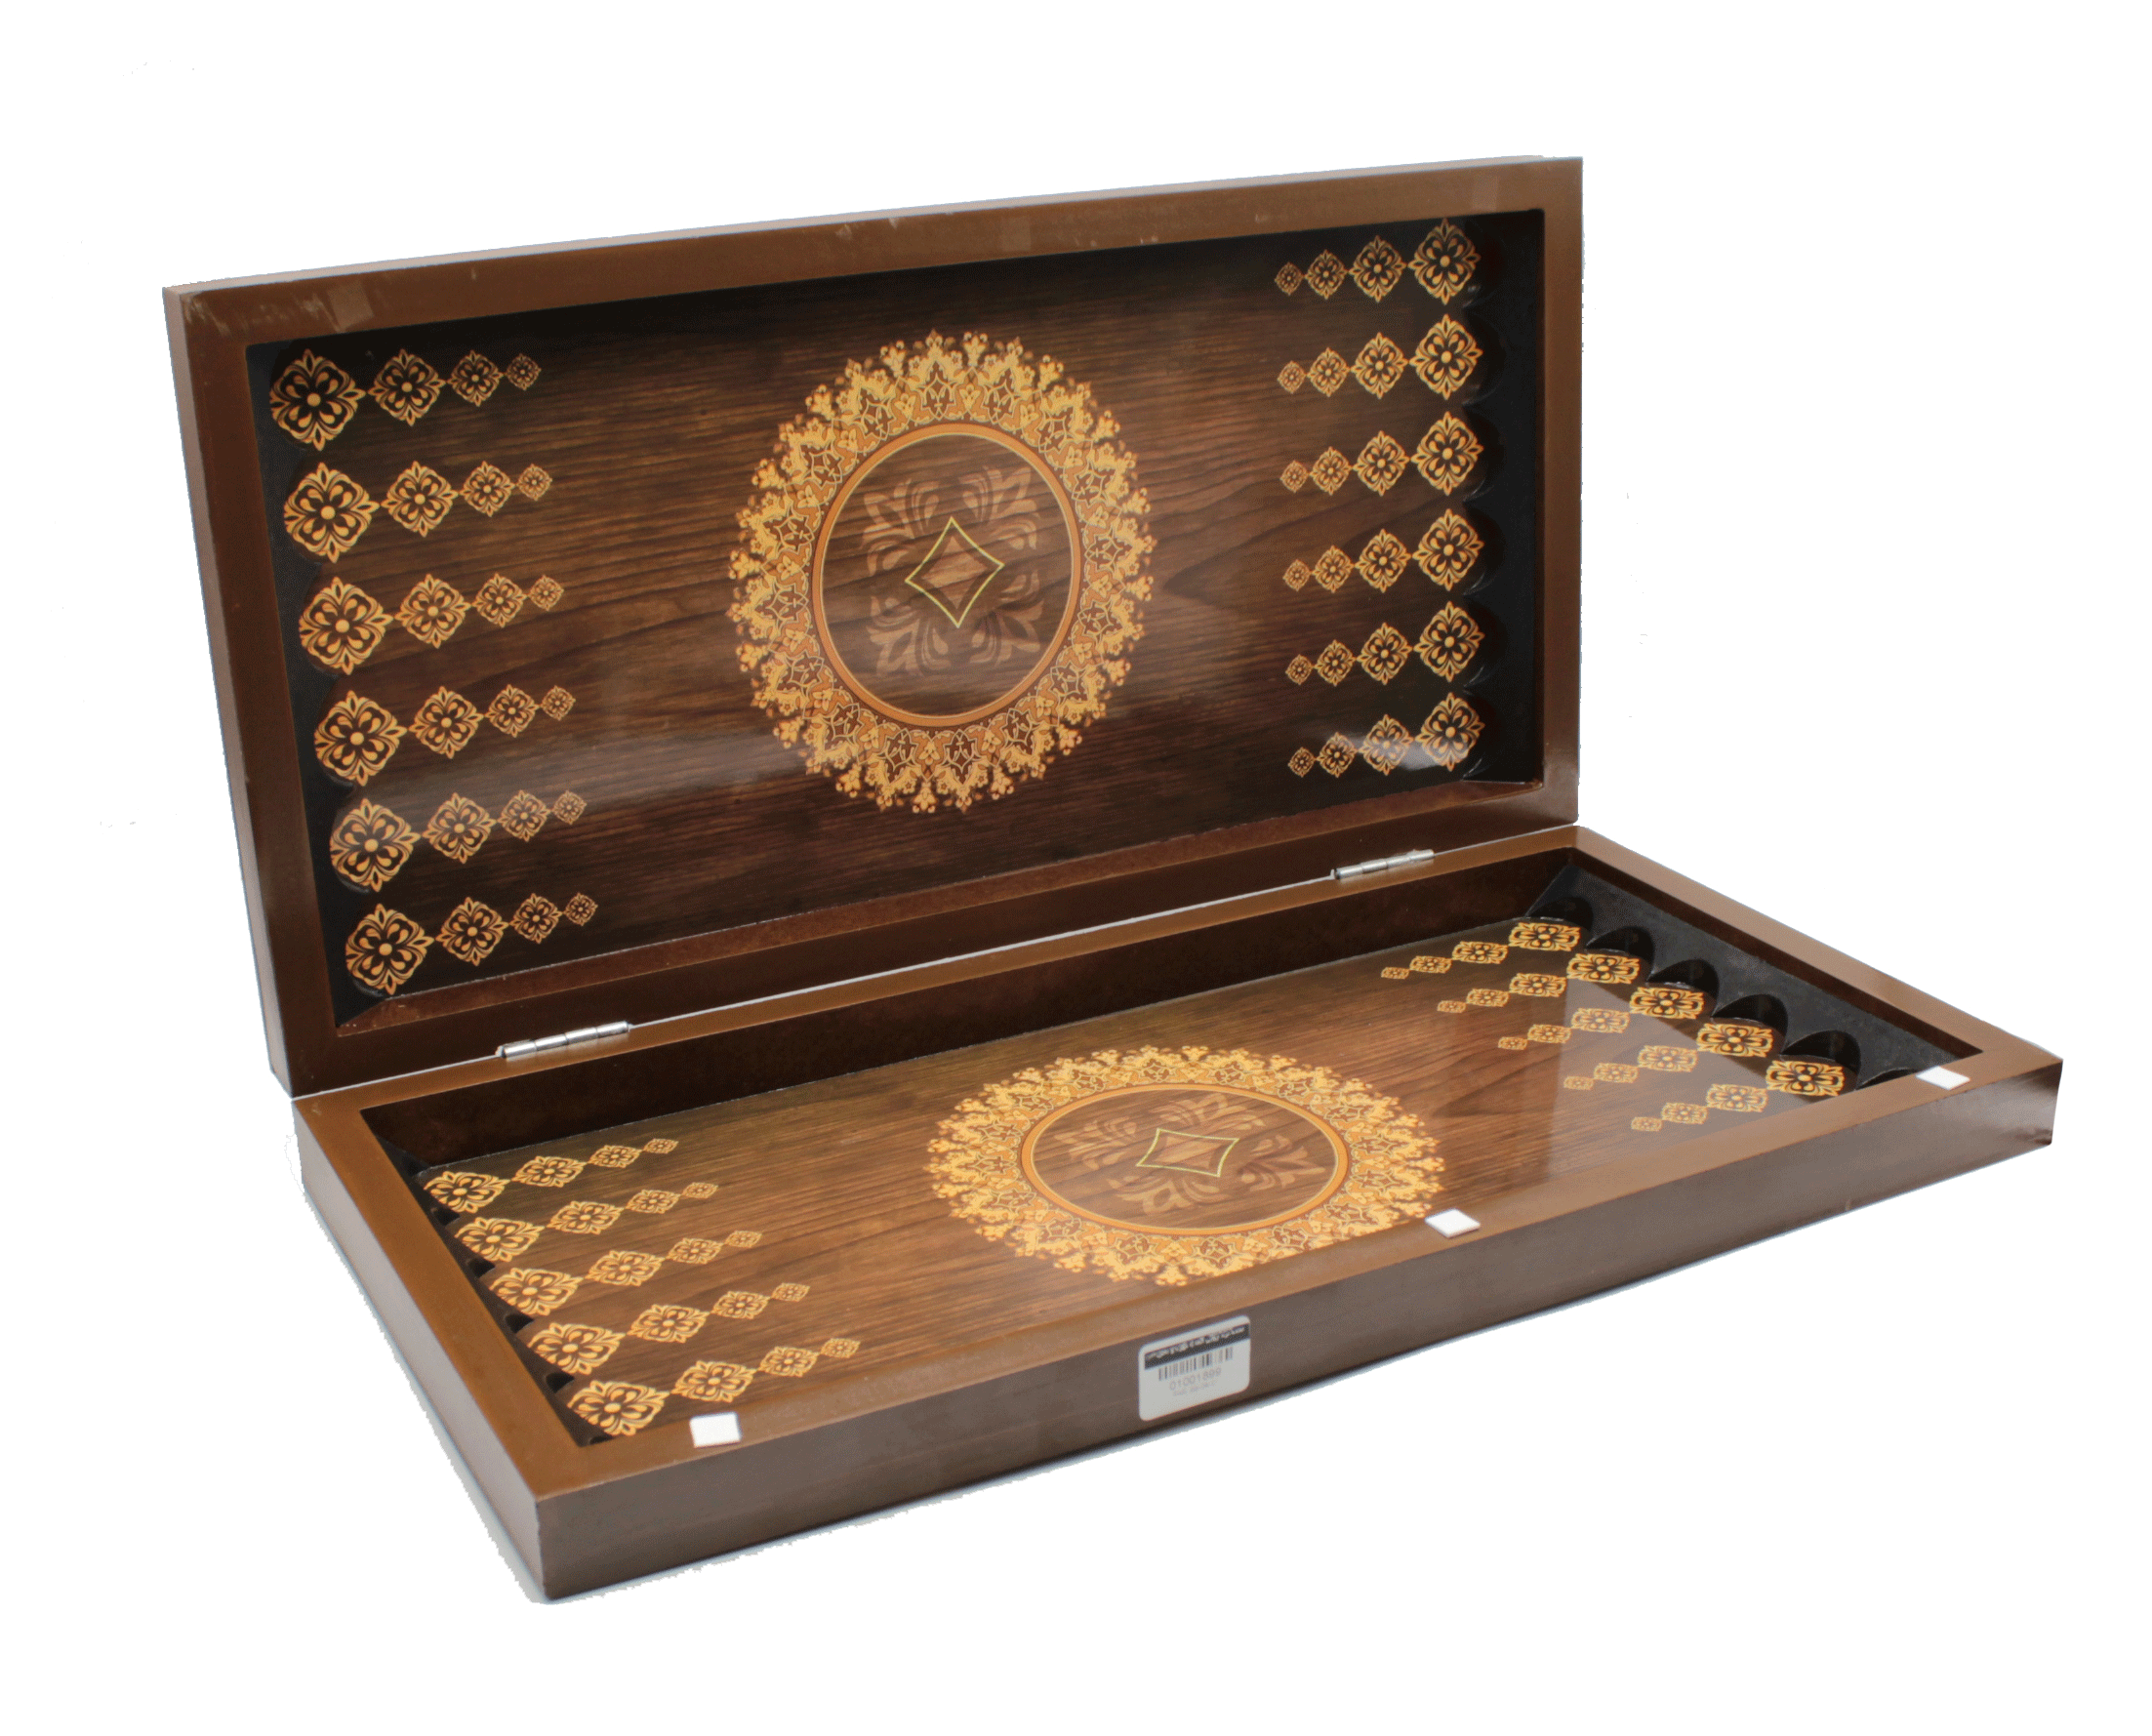 Backgammon and wooden chess 02%20(1)